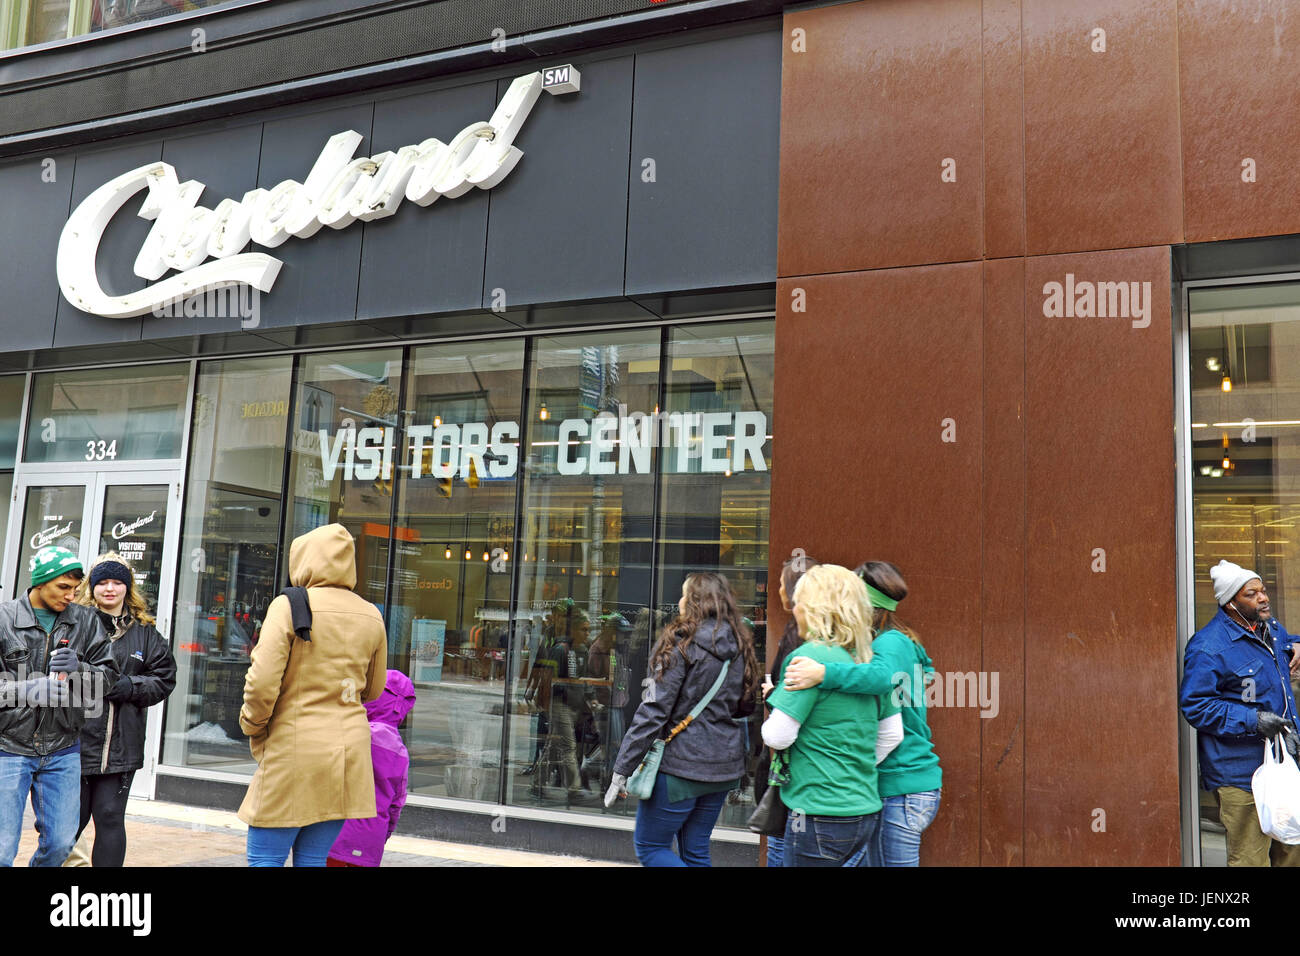 Pedestrians walk by the city of Cleveland visitors center on Euclid Avenue in downtown Cleveland, Ohio, USA on a chilly March afternoon. Stock Photo